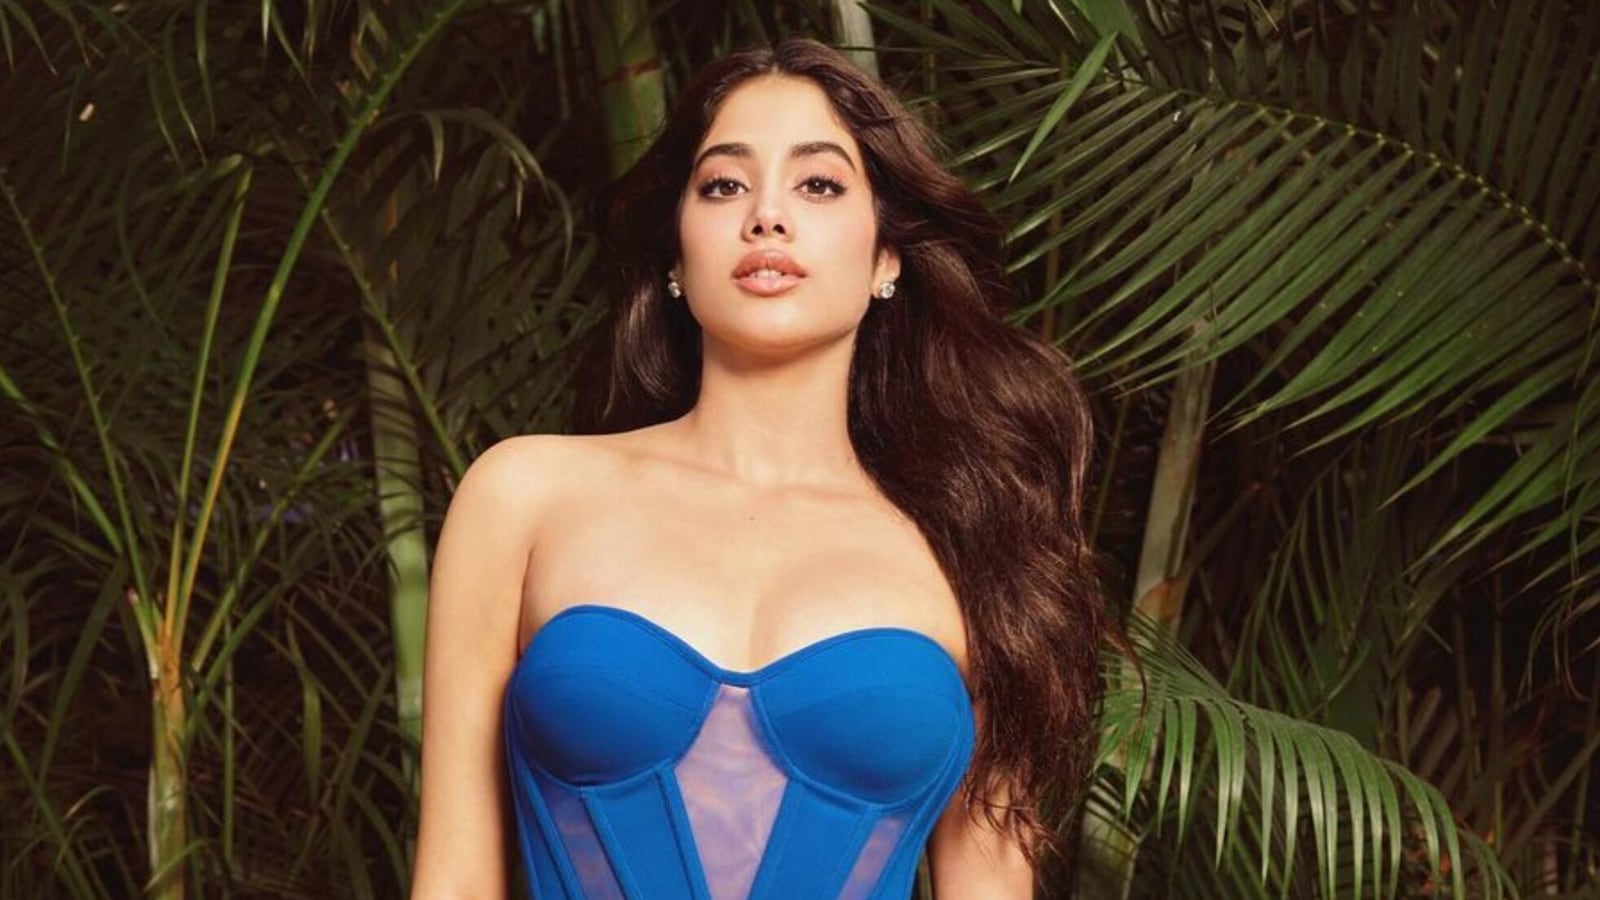 Janhvi Kapoor says ‘math makes you retarded’, Twitter roasts her for it: ‘Arre didi!’